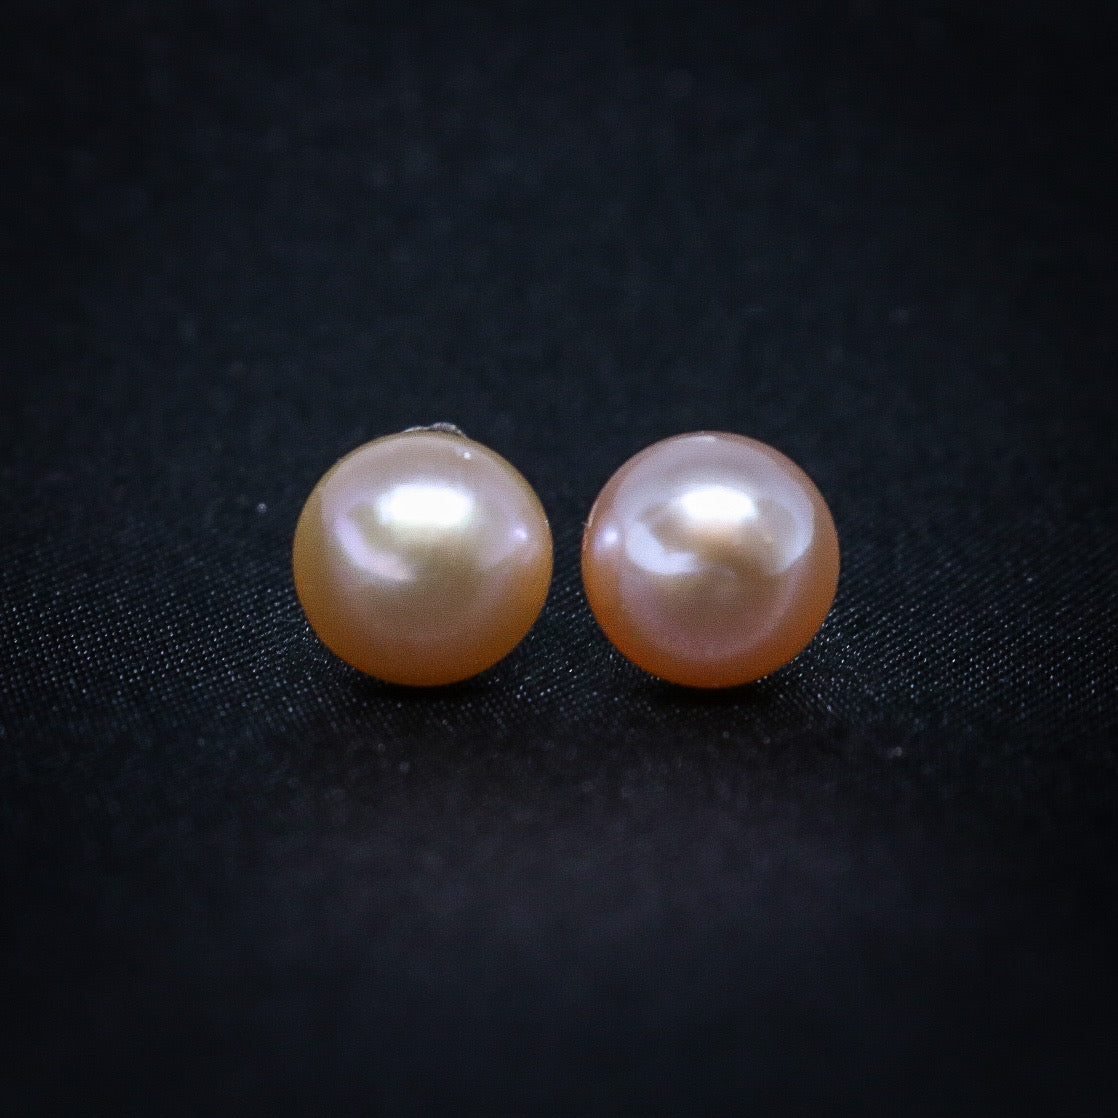 8mm Peach Pink Round Freshwater Pearl Earrings - 925 Silver